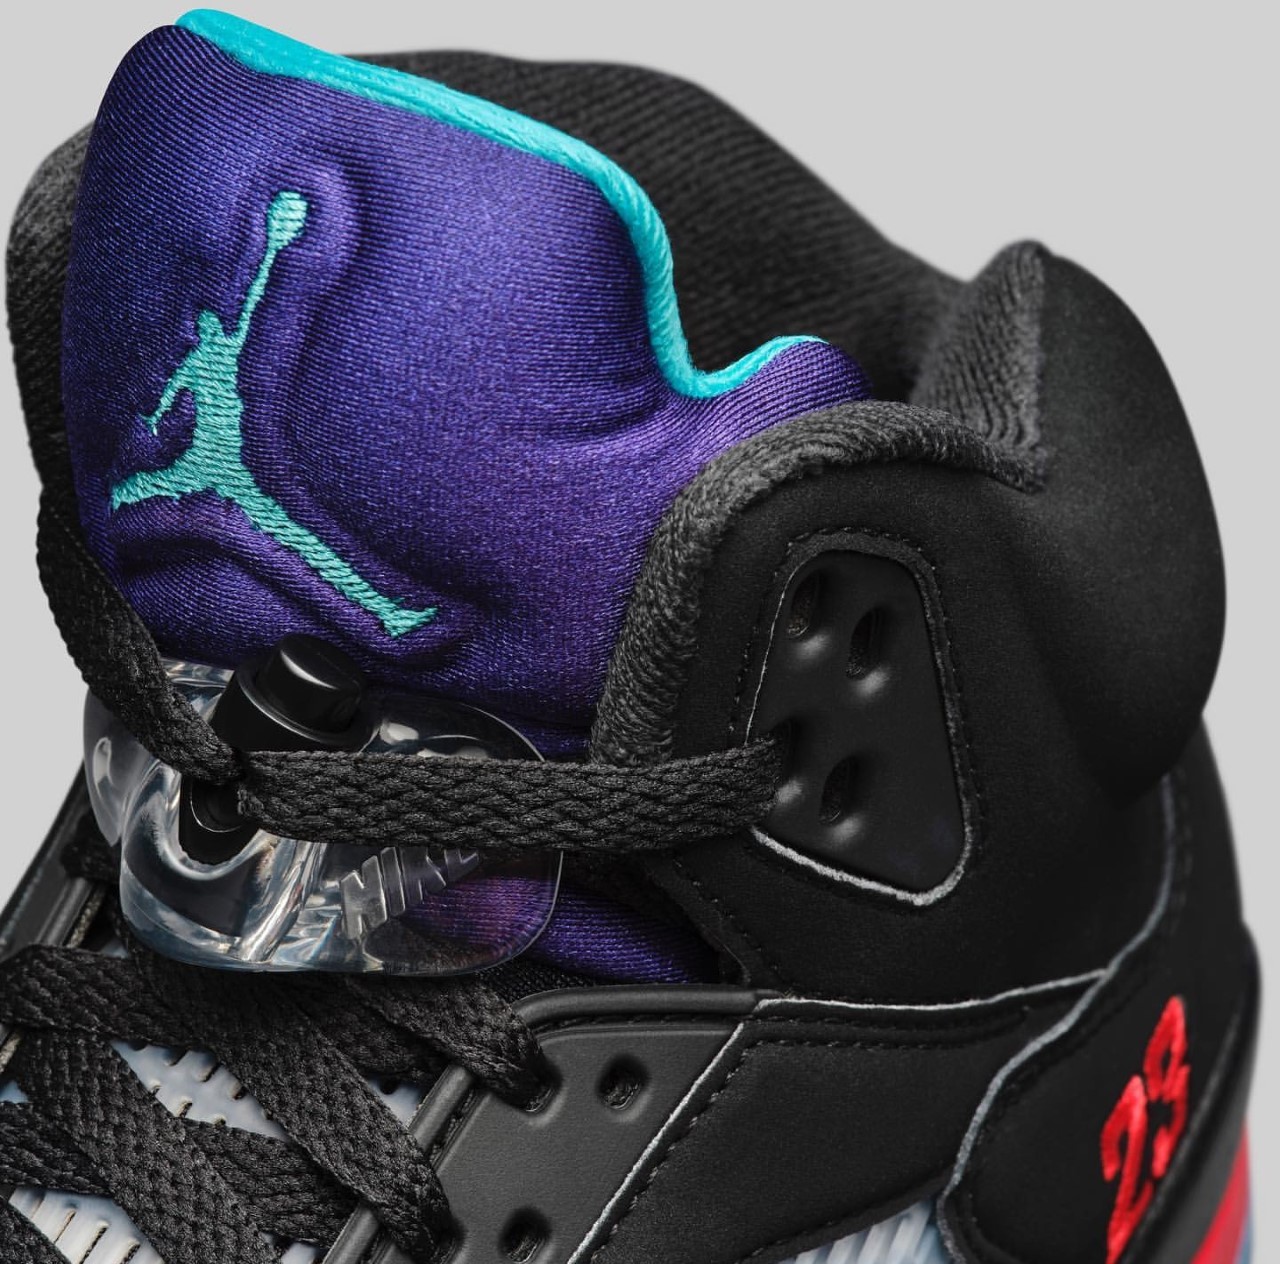 Nike Officially Unveils The “Top Three” Air Jordan 5